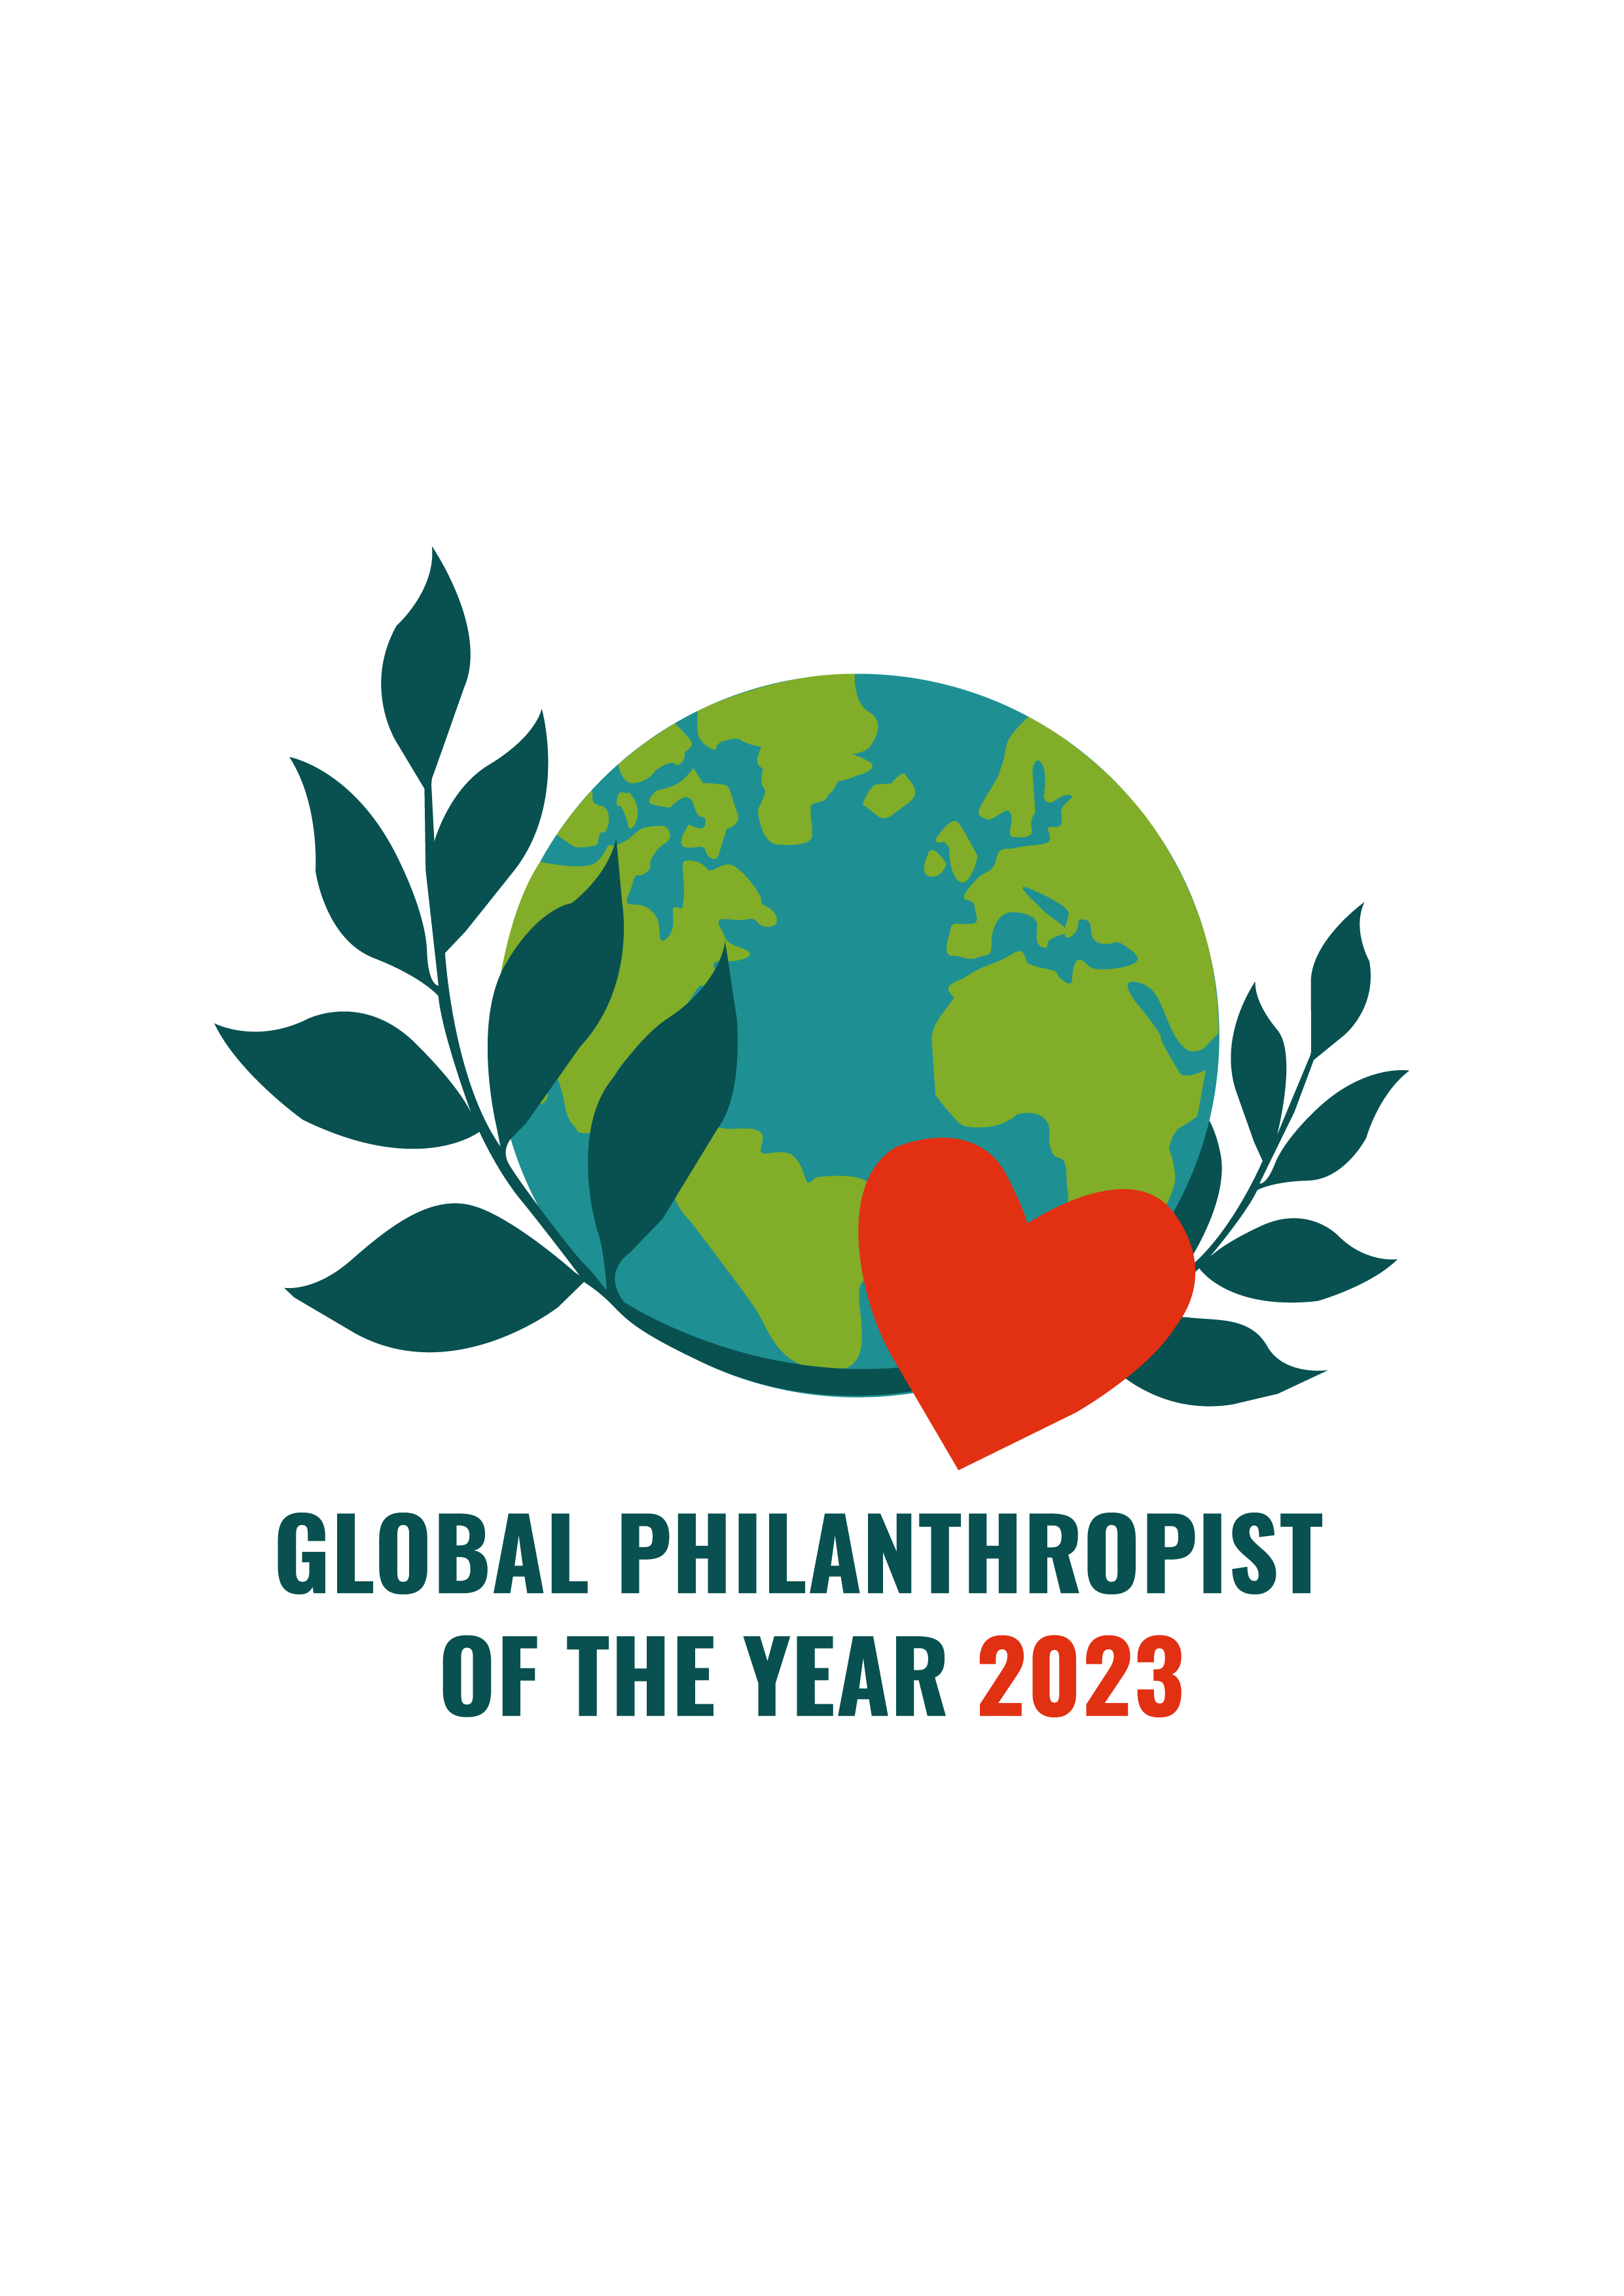 In photo: Logo of Global Philanthropist of the year 2023